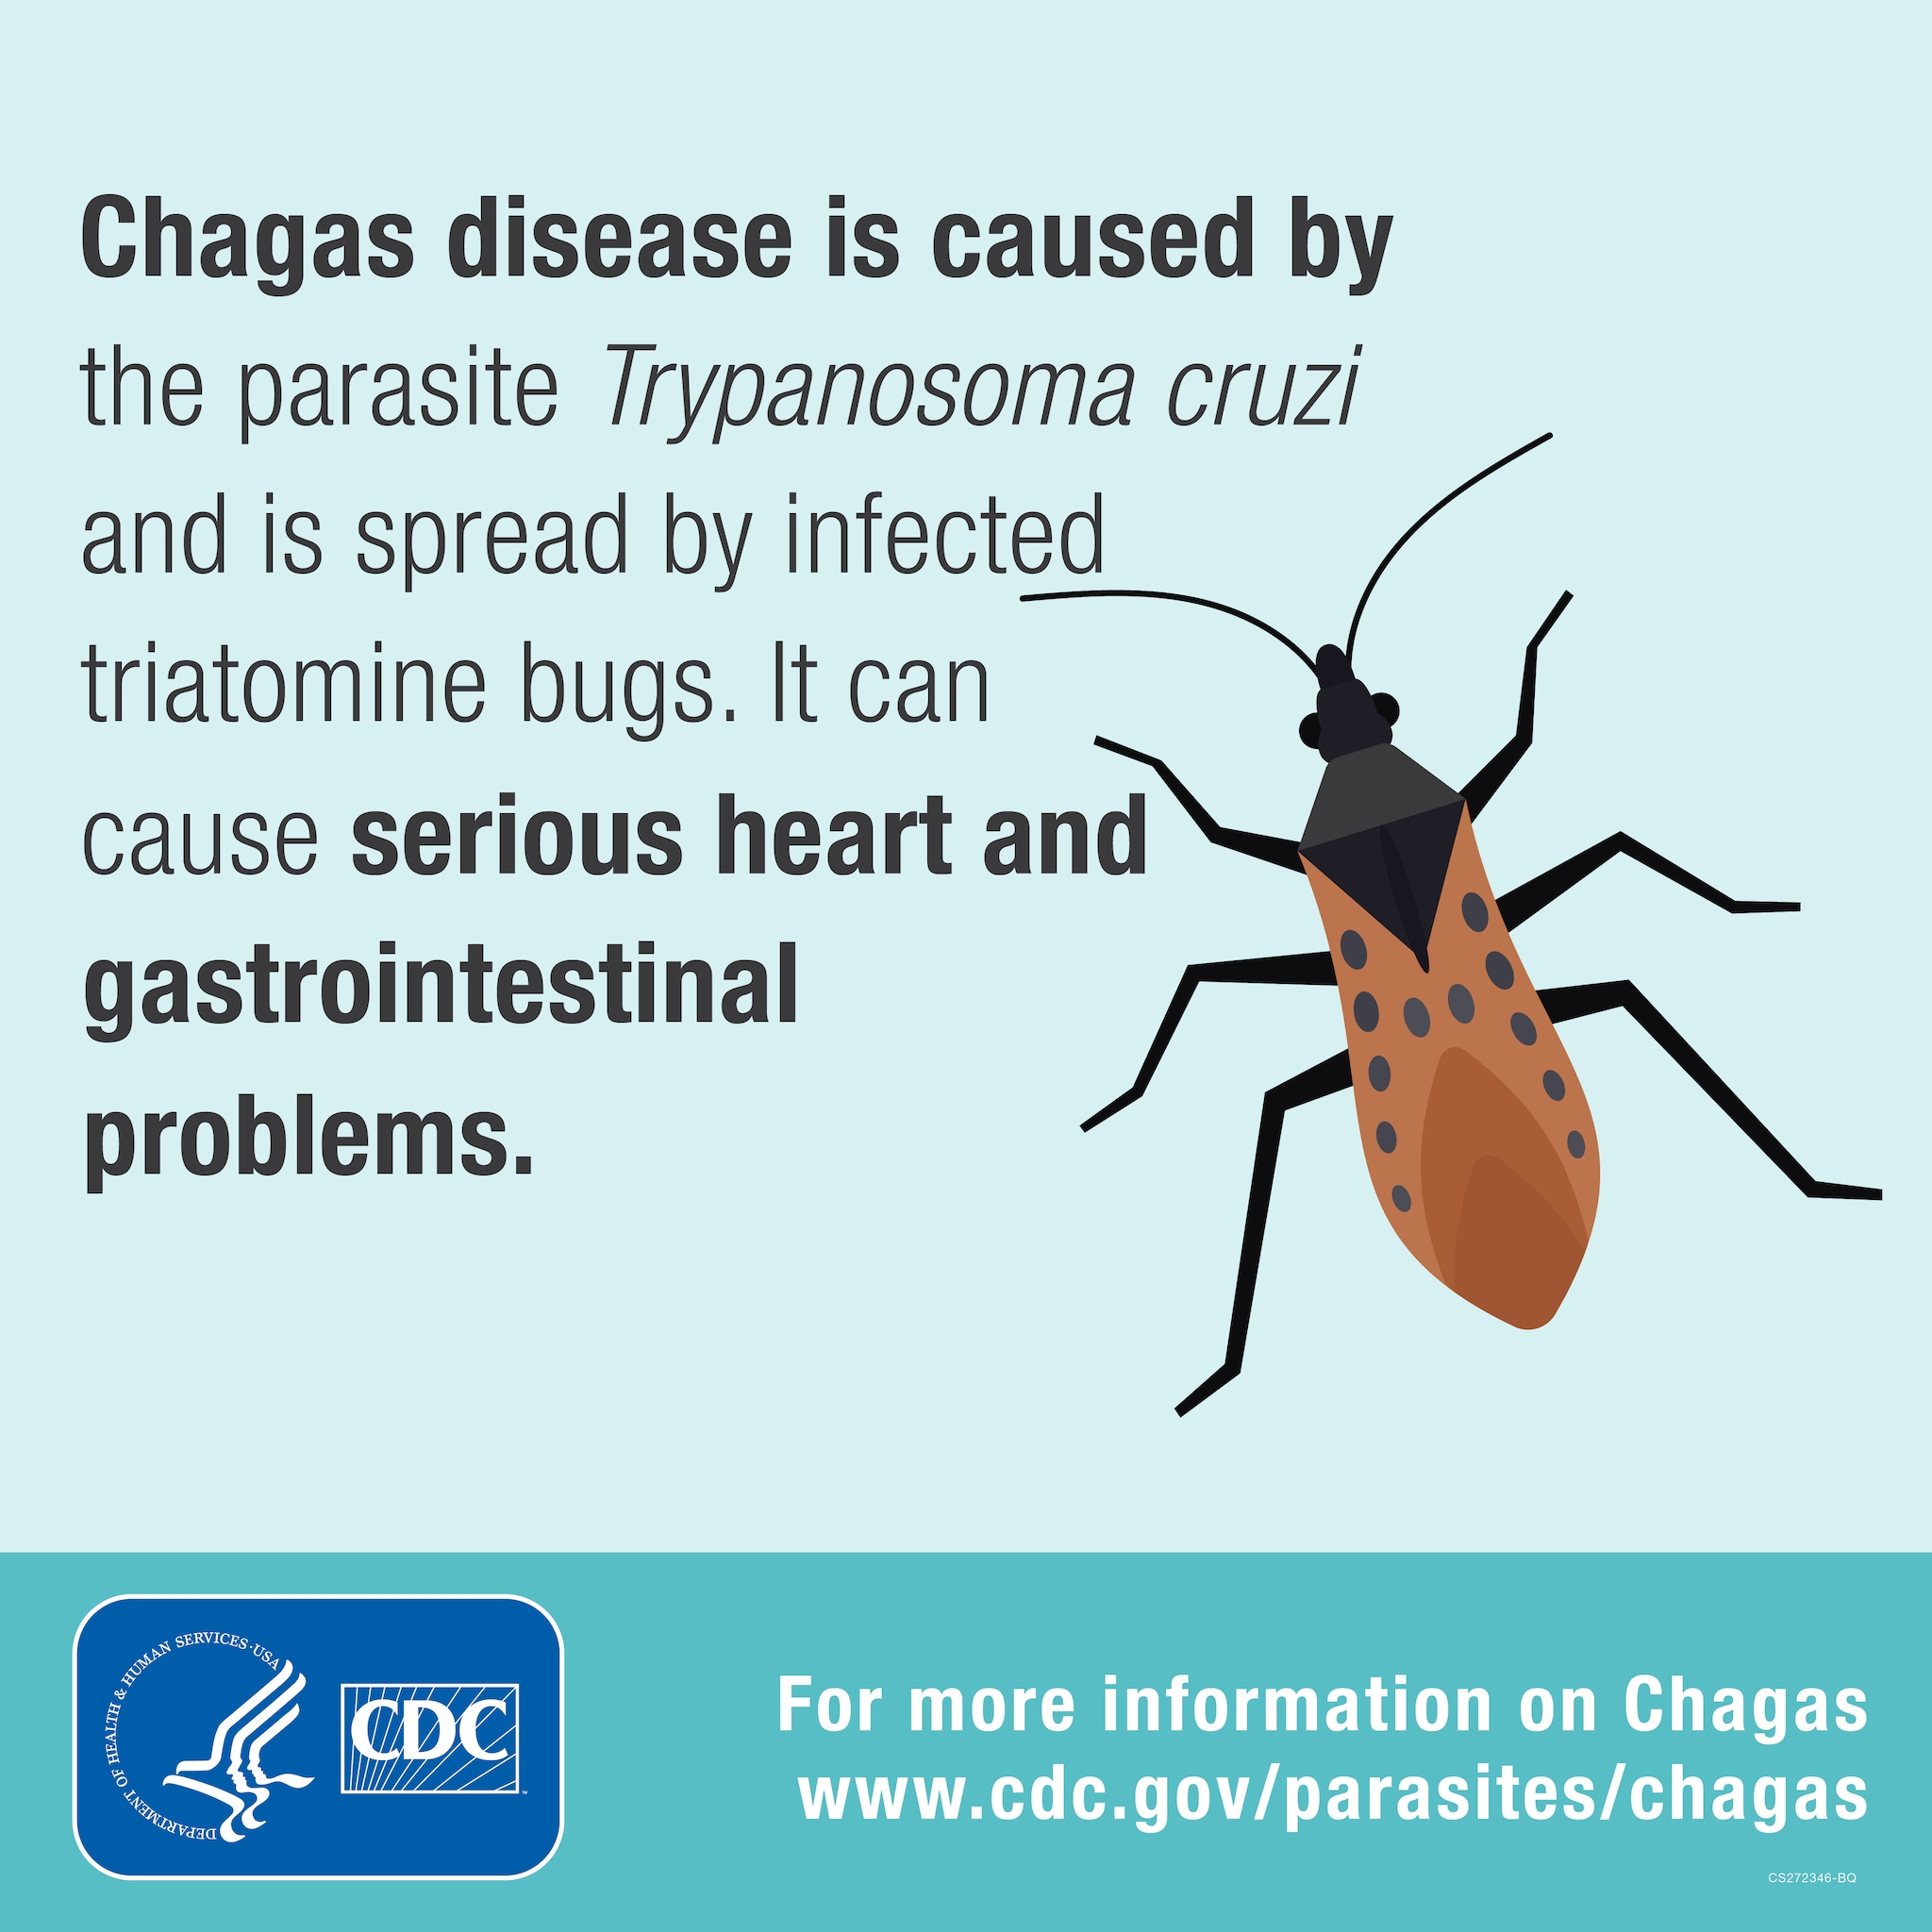 Chagas disease is caused by the parasite Trypanosoma cruzi and is spread by infected triatomine bugs.